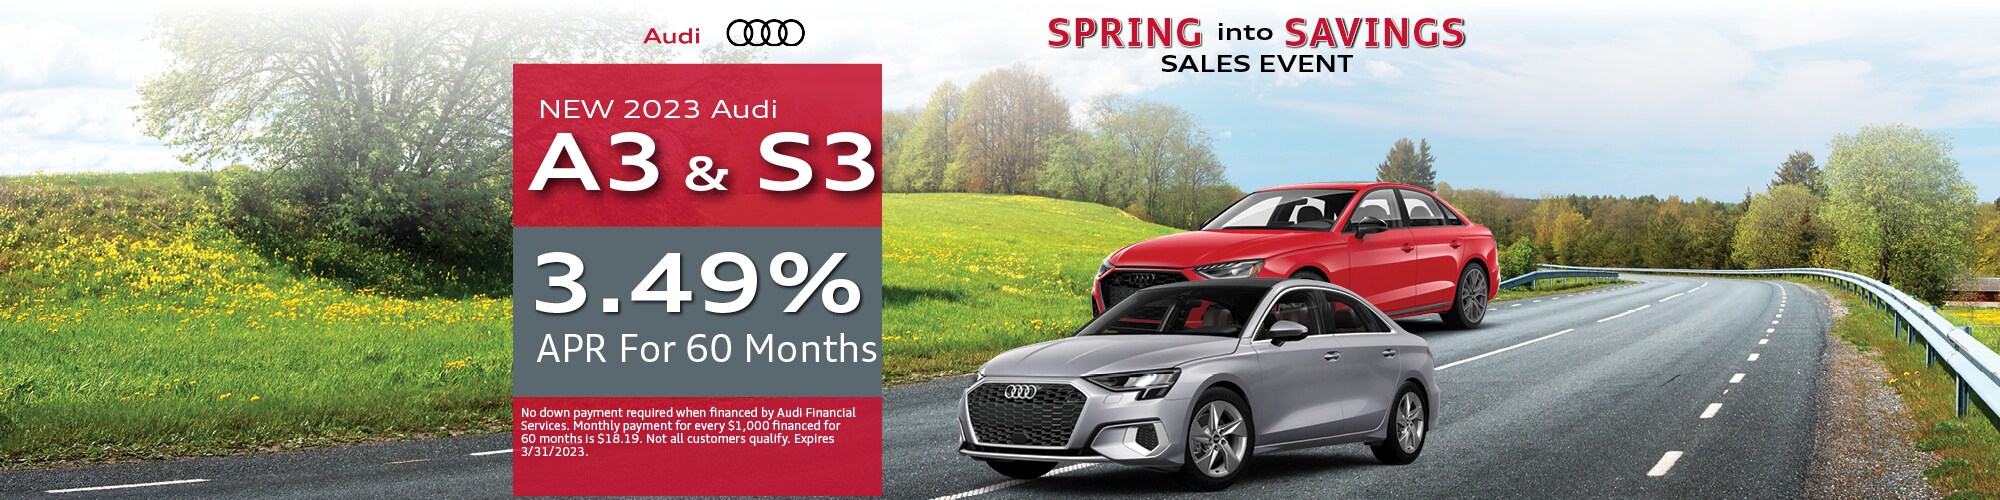 2023 Audi A3 and S3 Special Offer | Audi Hoffman Estates, IL